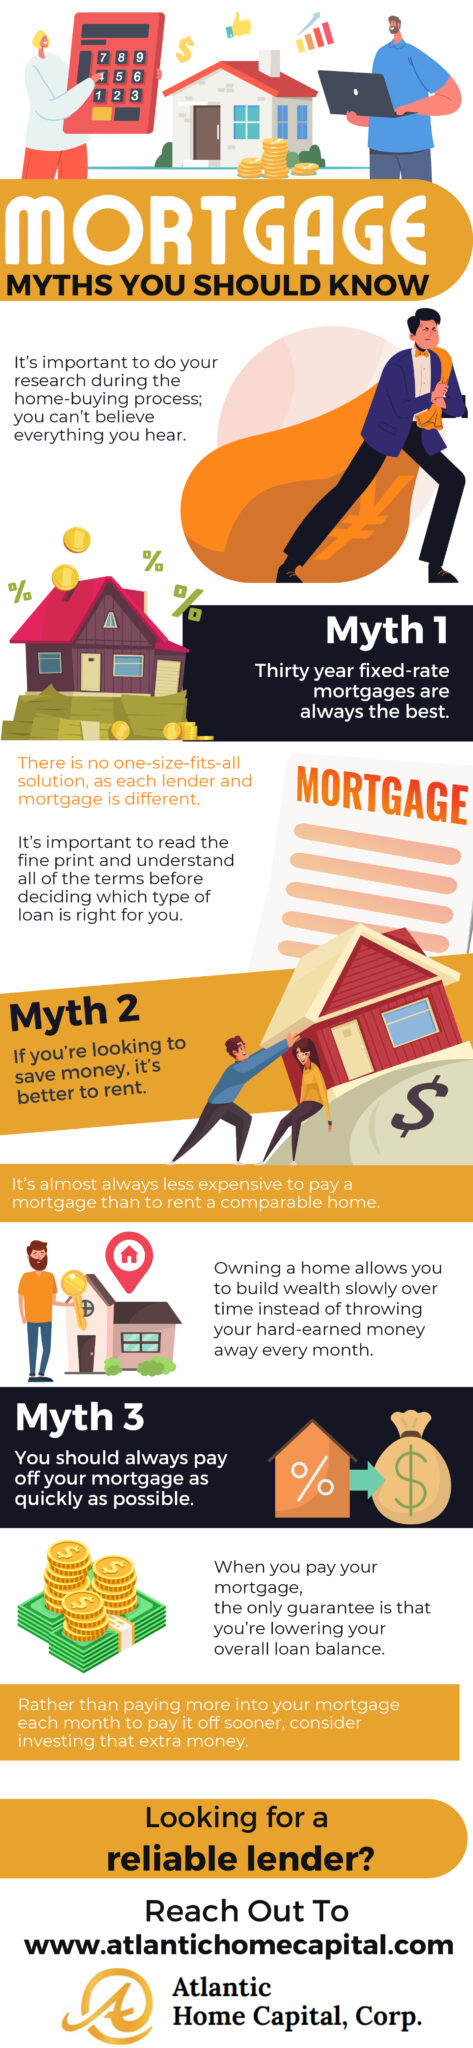 Mortgage MYTHS you should Know